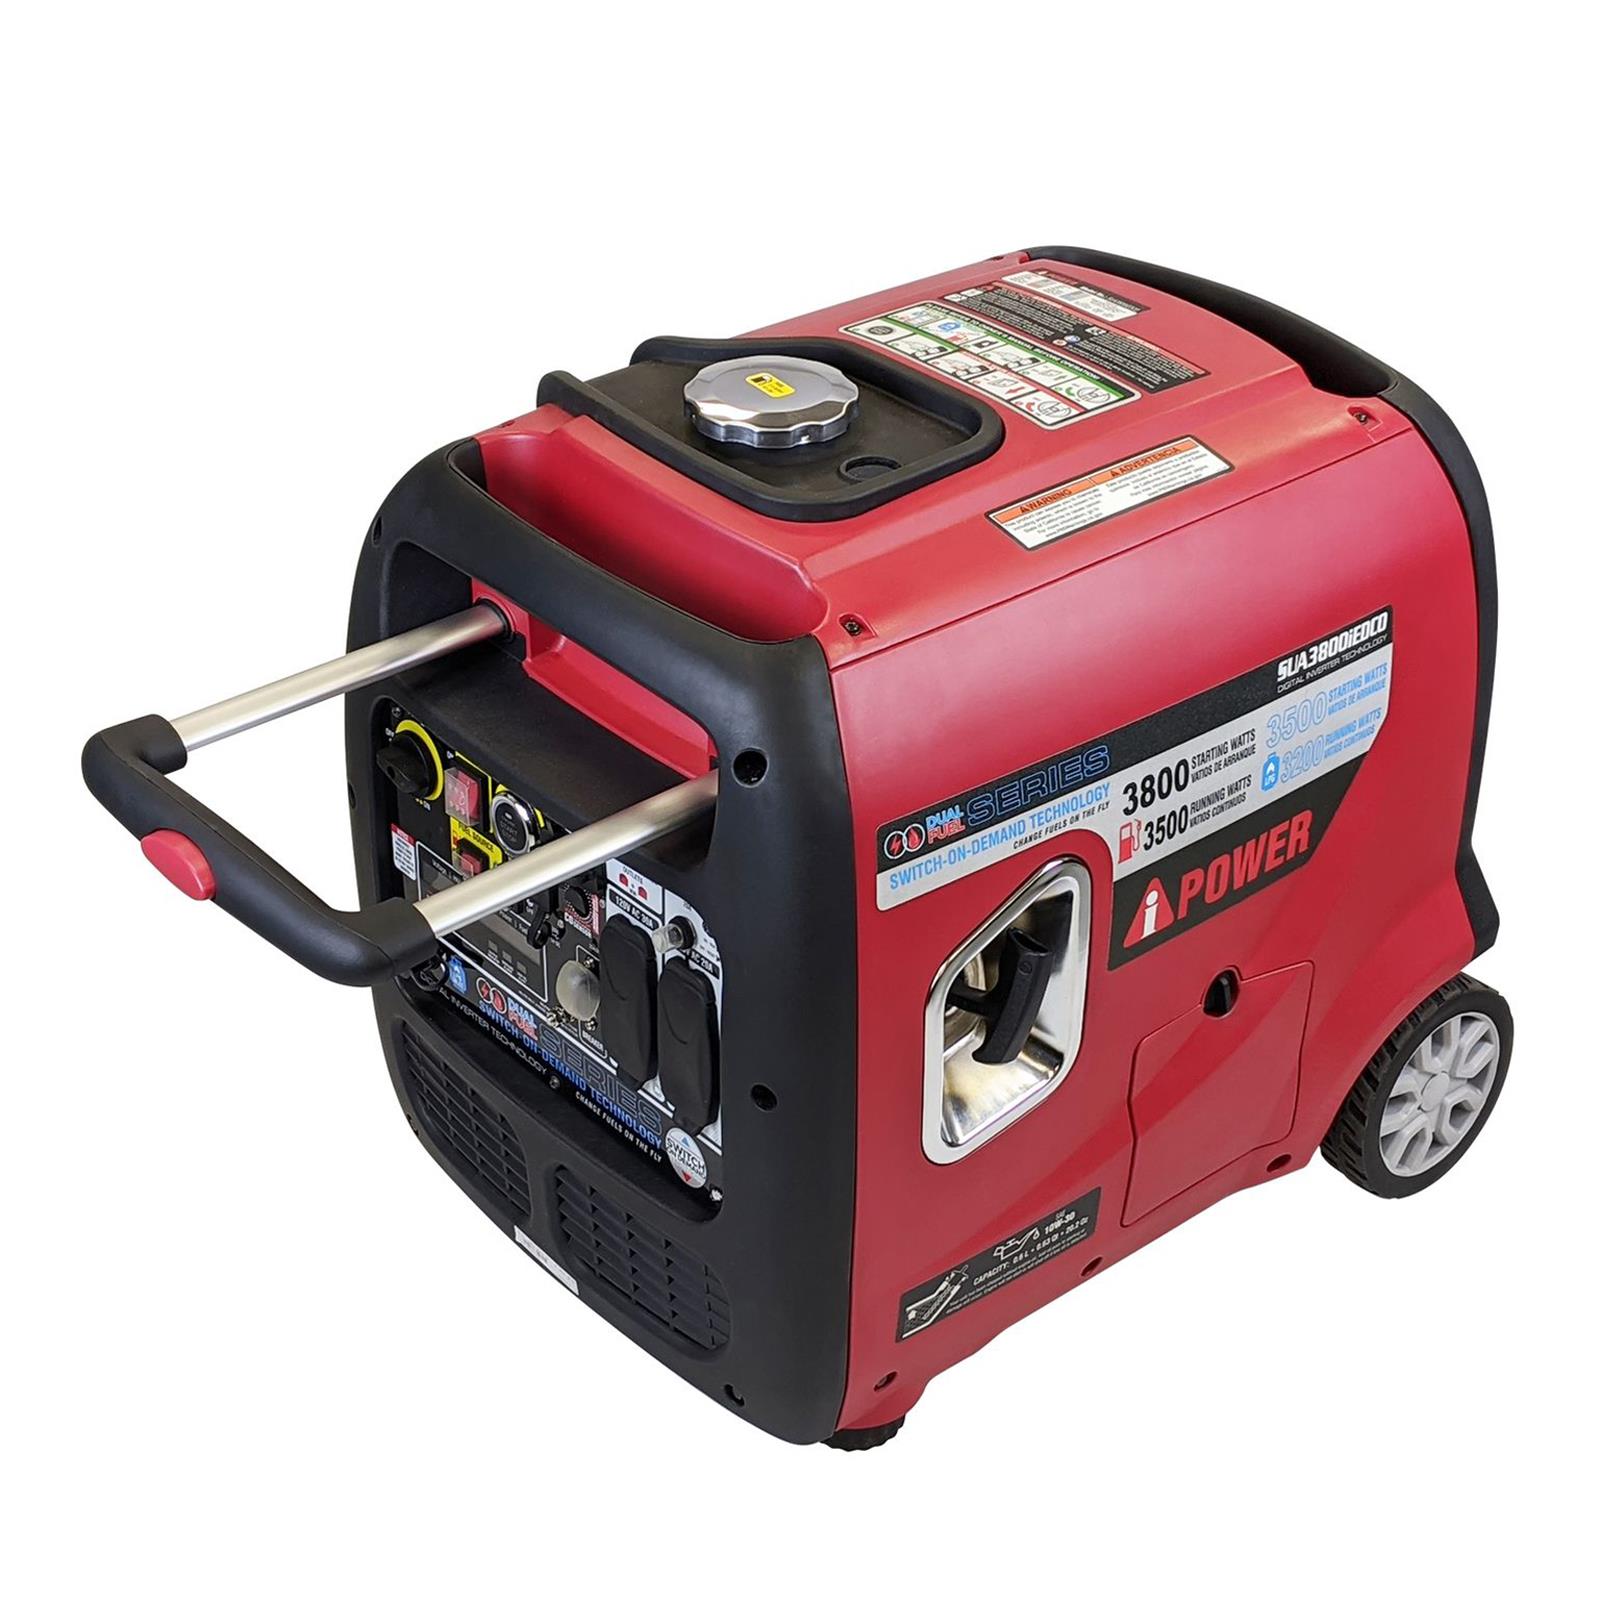 A-iPower SUA3800IED A-iPower Inverter Generators | DX Engineering